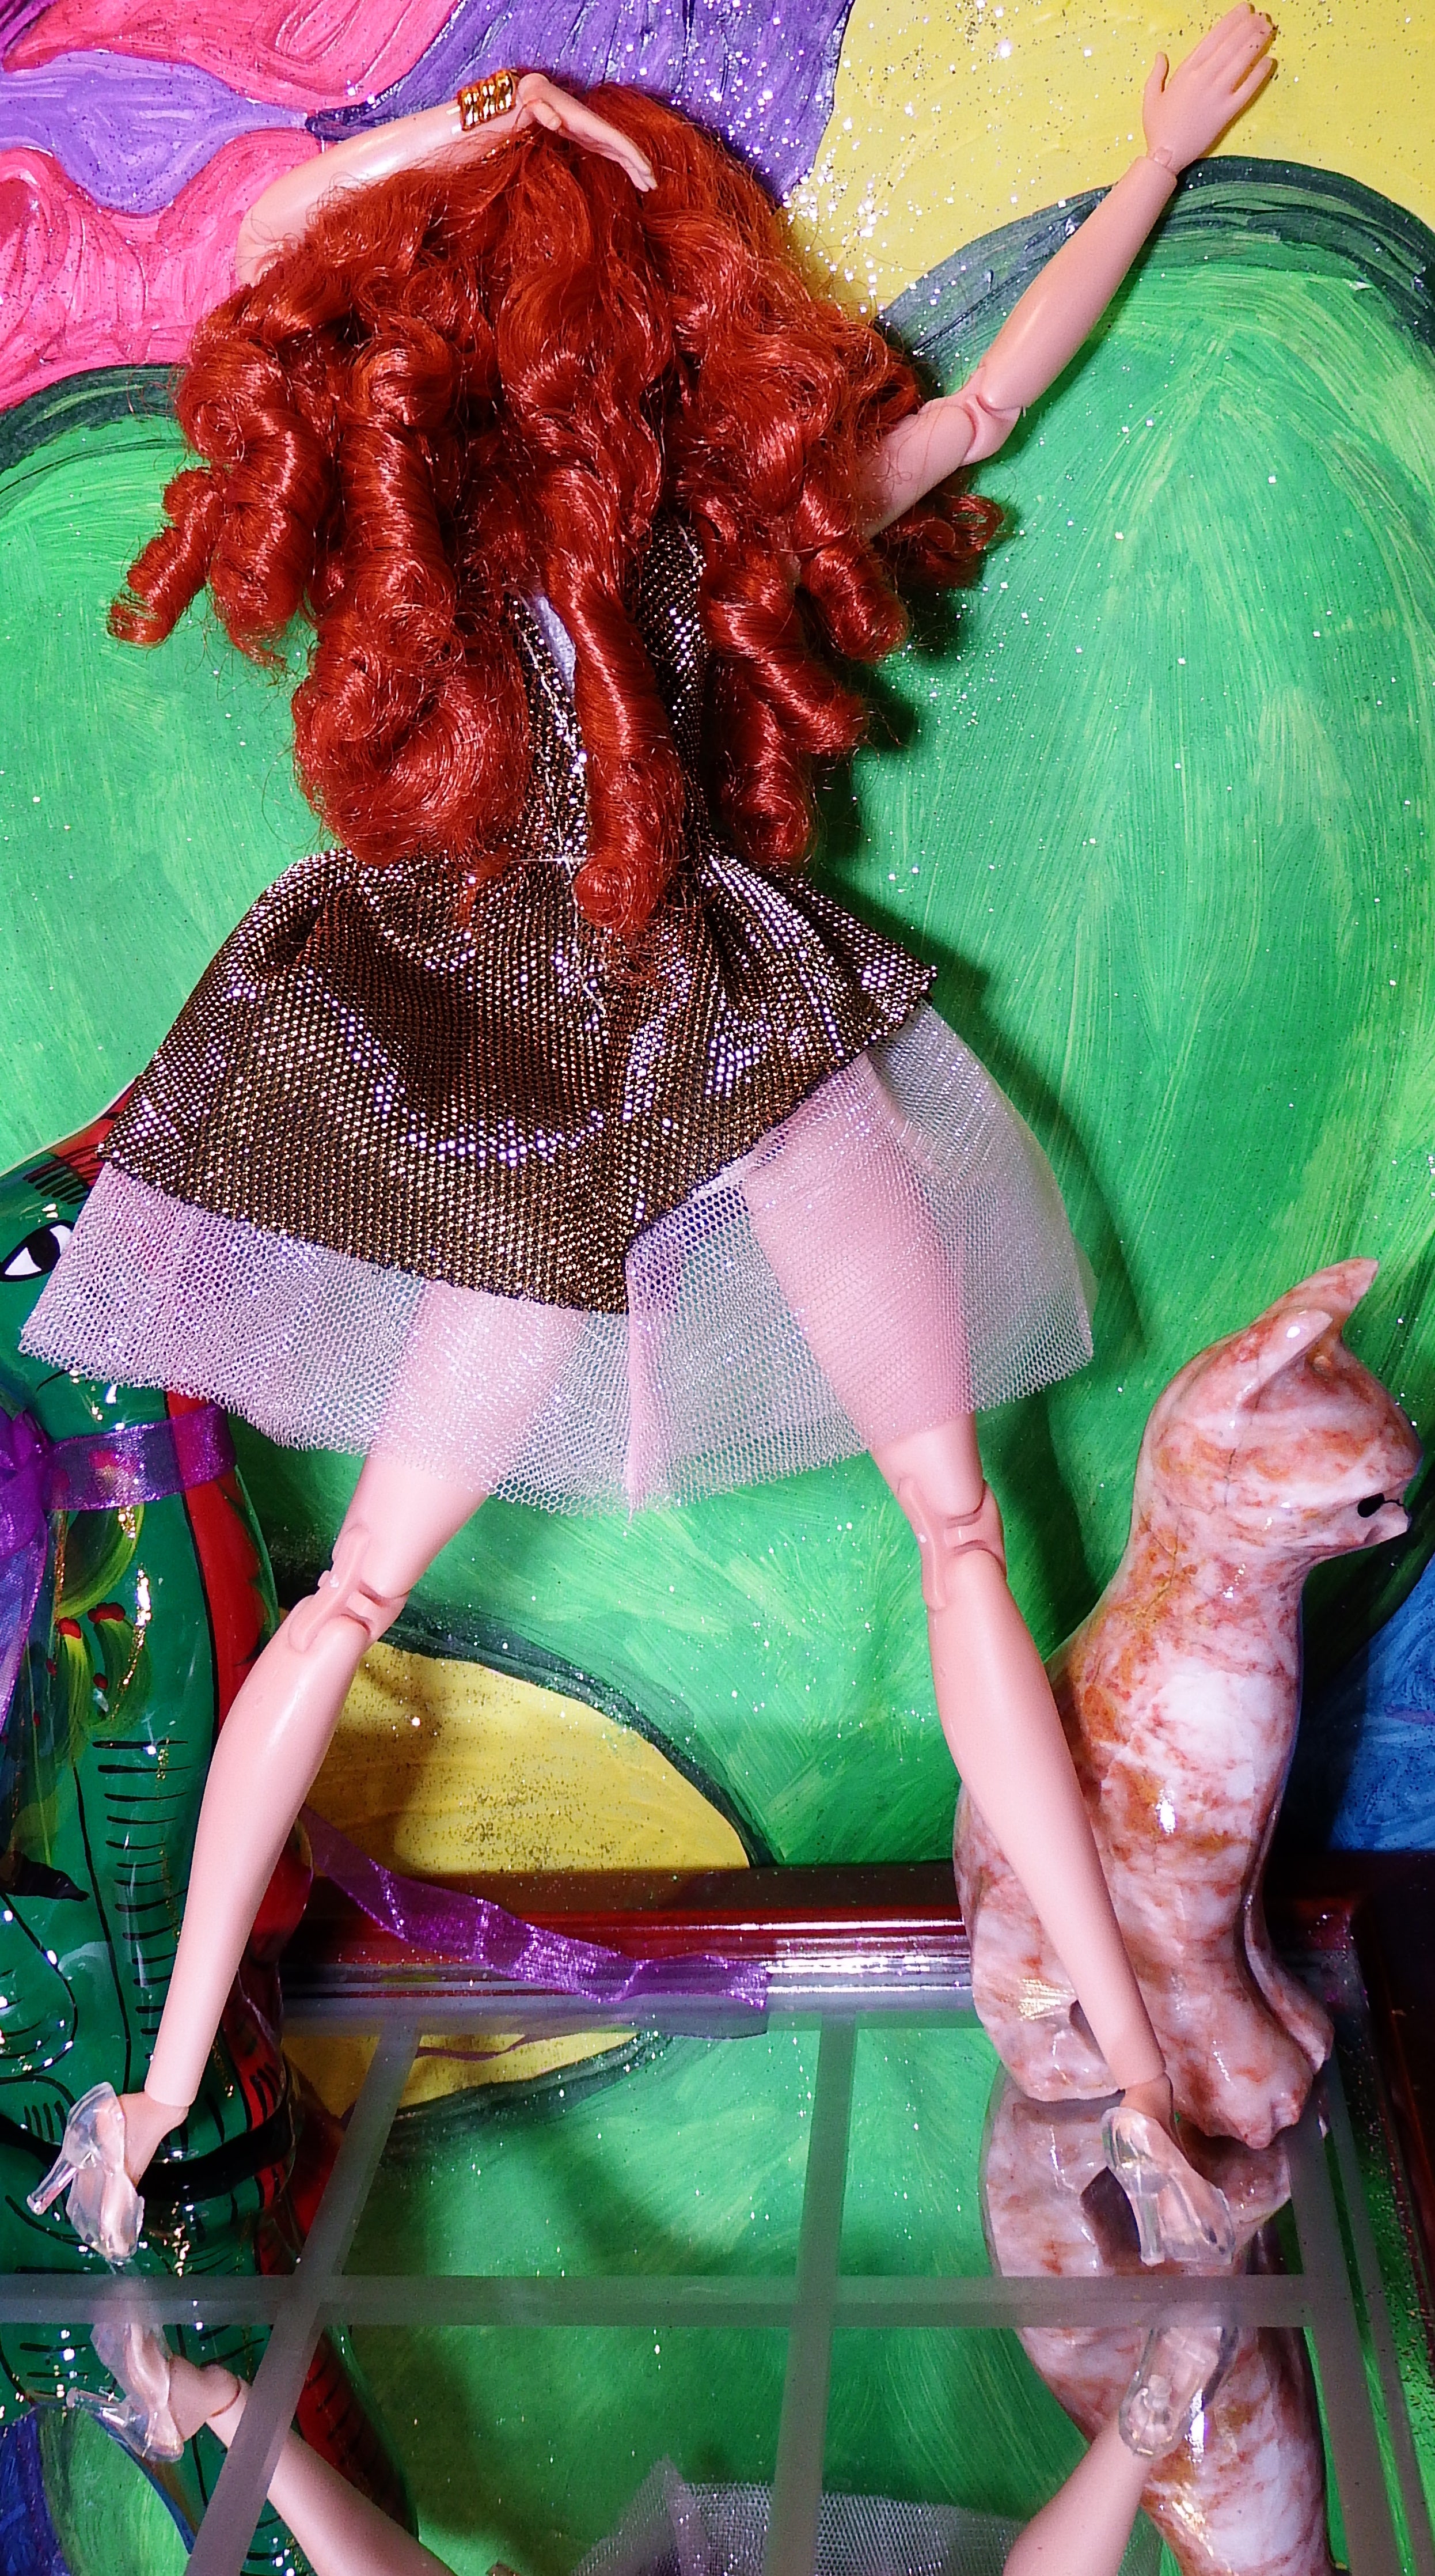 Barbie Red Head in Party Dresses